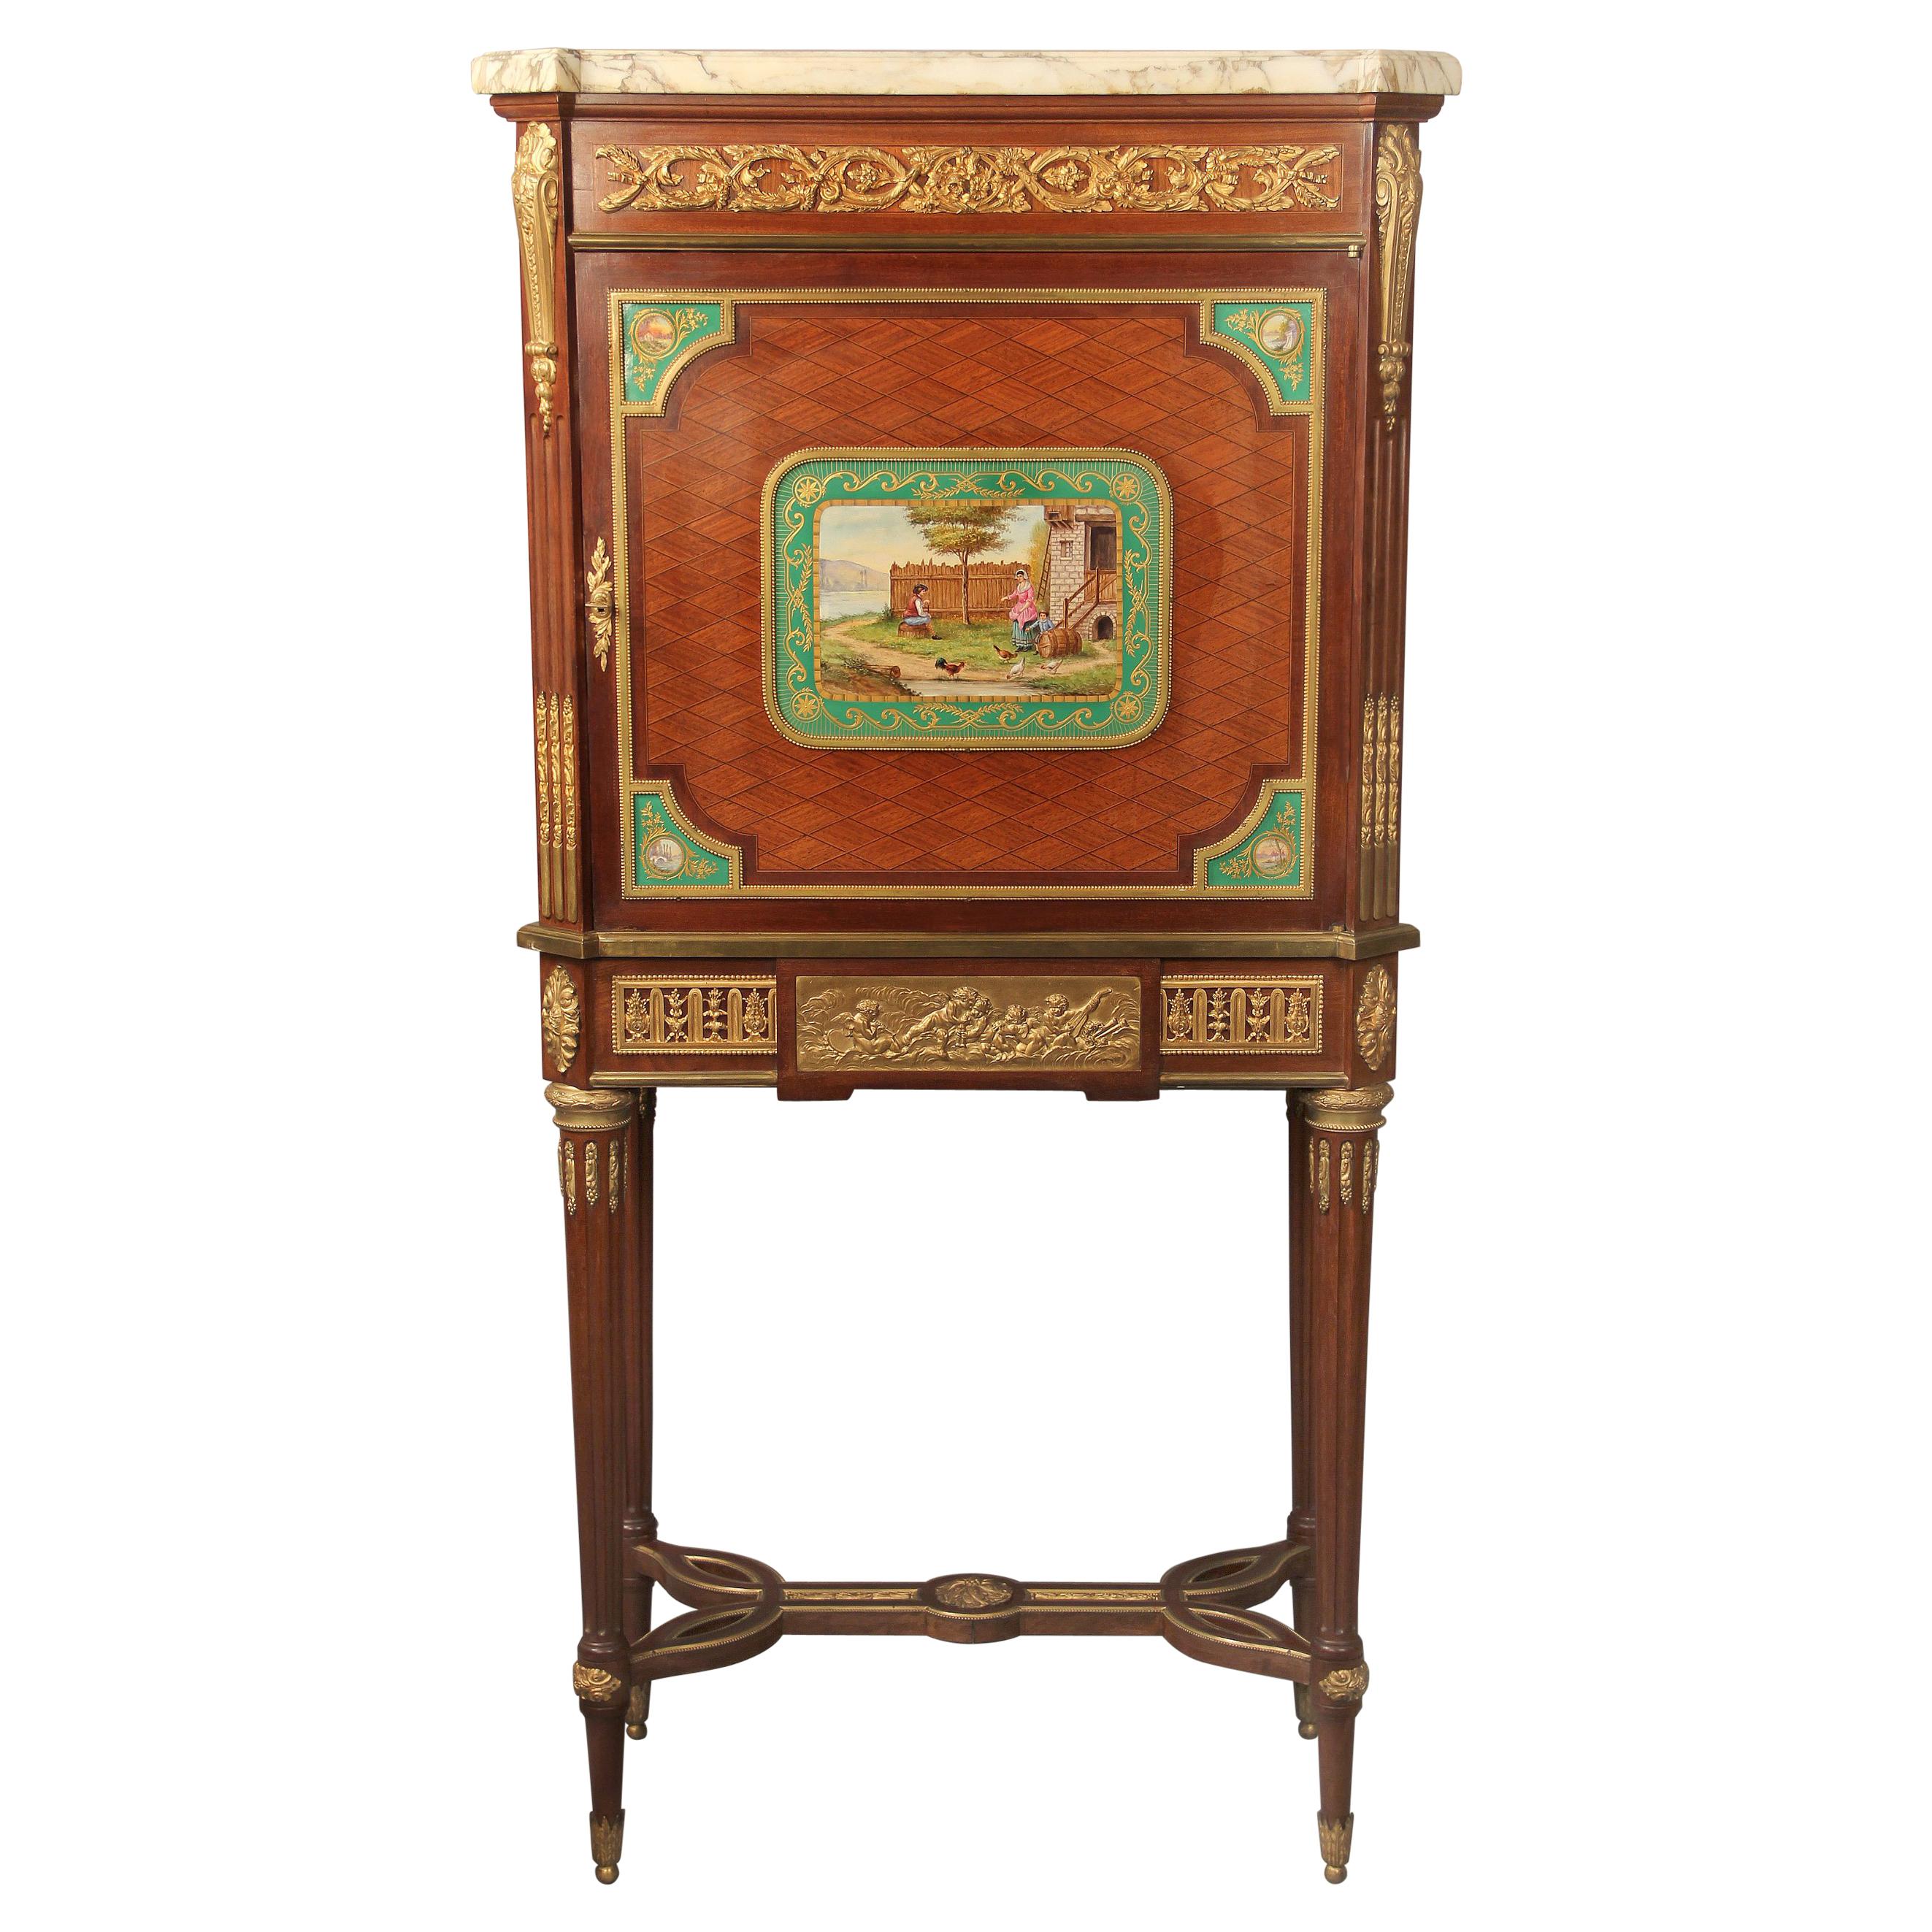 19th Century Gilt Bronze and Sèvres Style Porcelain Mounted Parquetry Cabinet